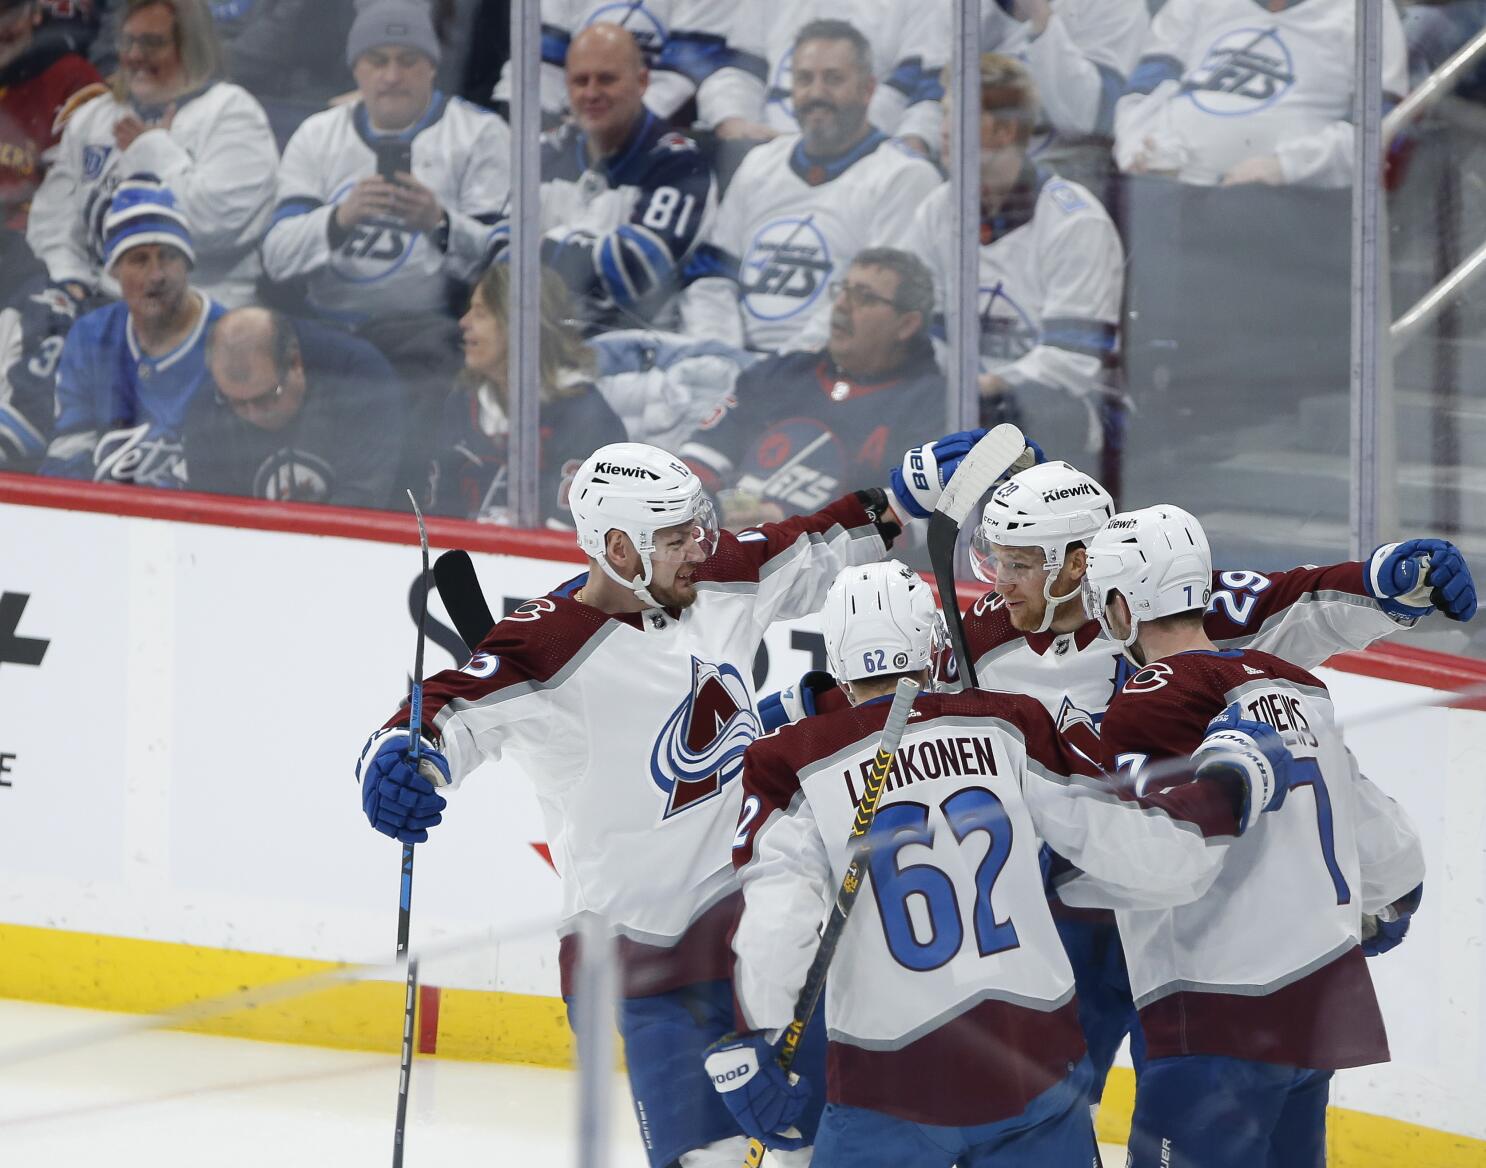 Avalanche blitz Jets early, win 5-1 for 4th straight - The San